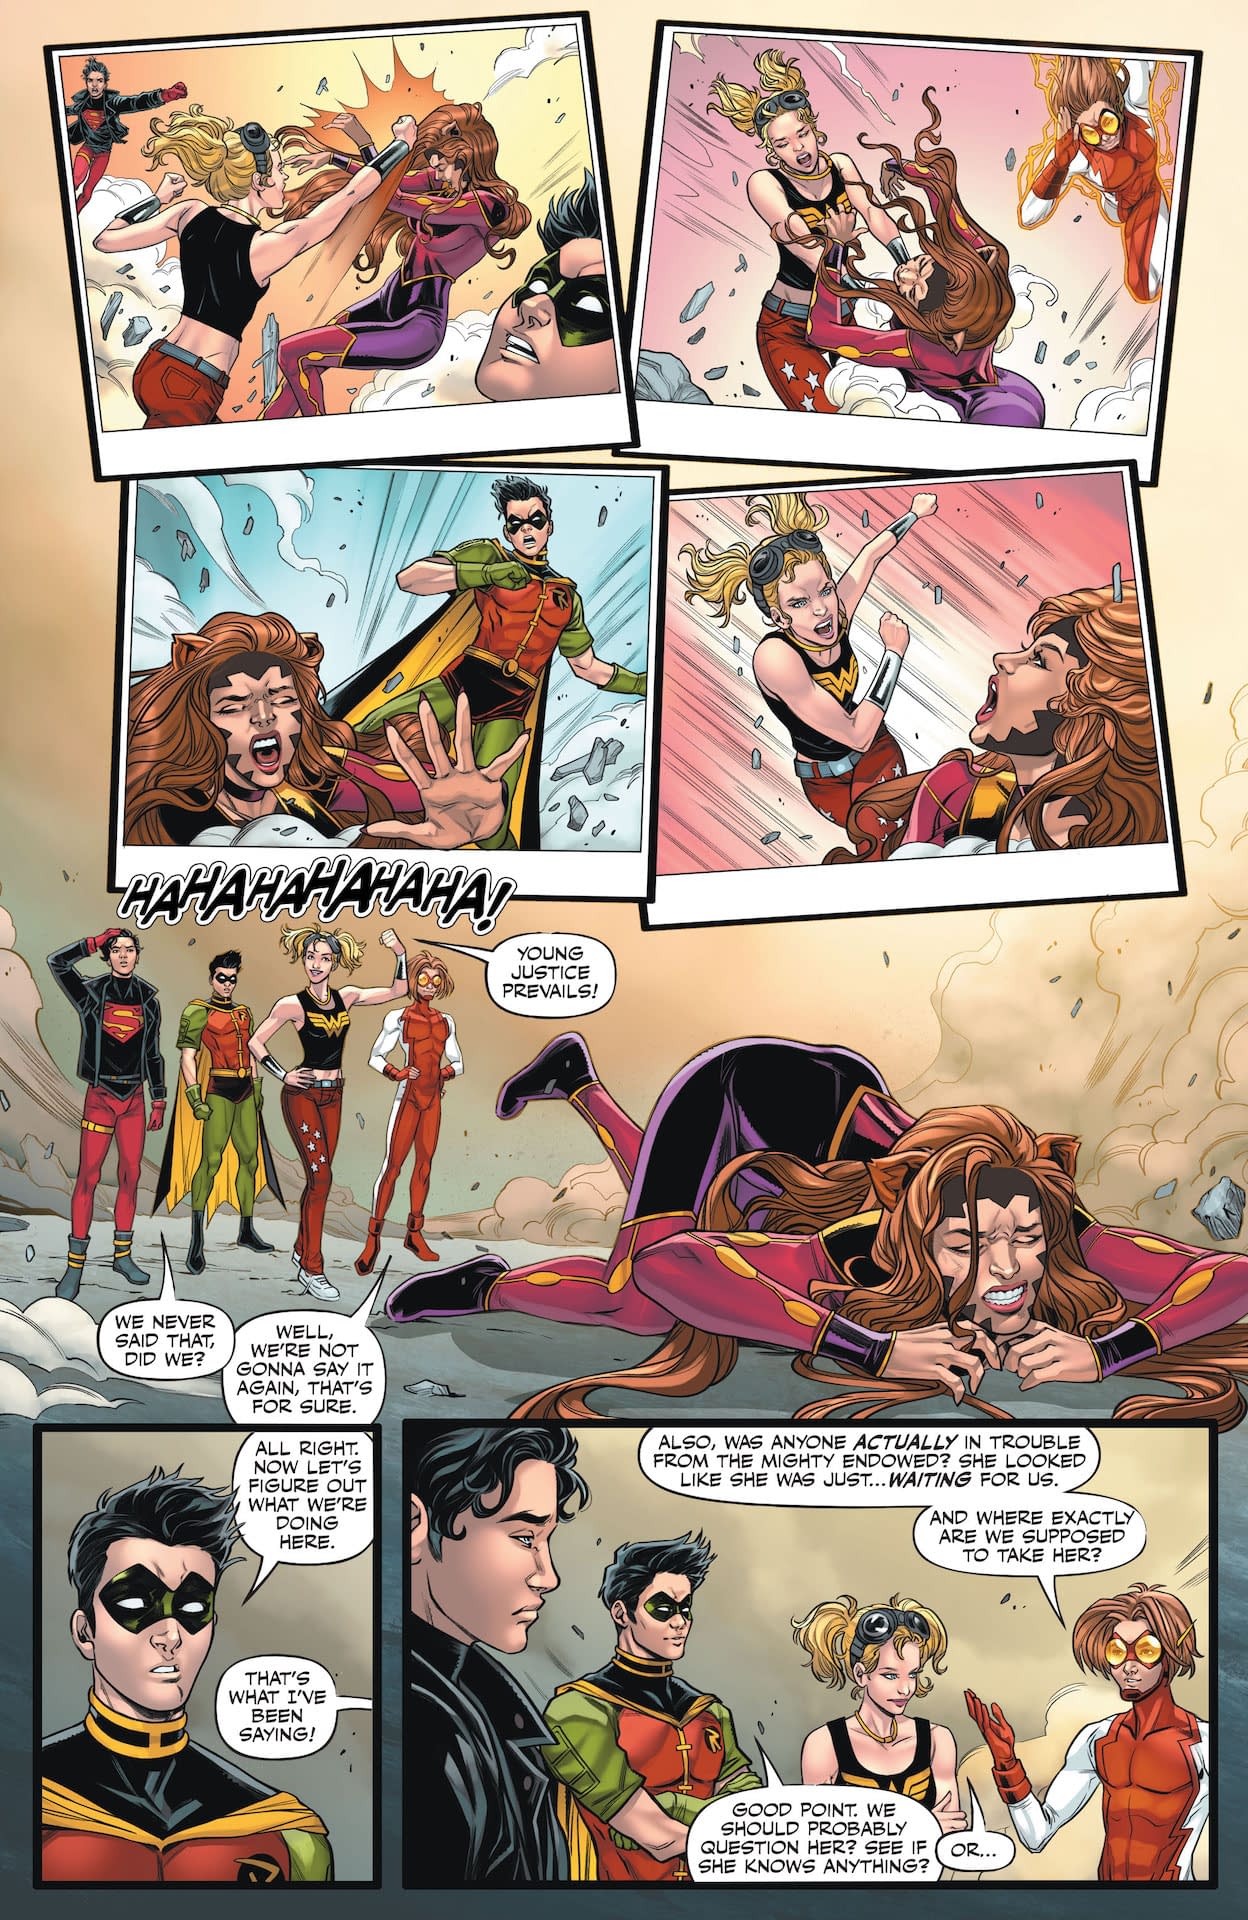 Dark Crisis: Young Justice #4 review – Too Dangerous For a Girl 2